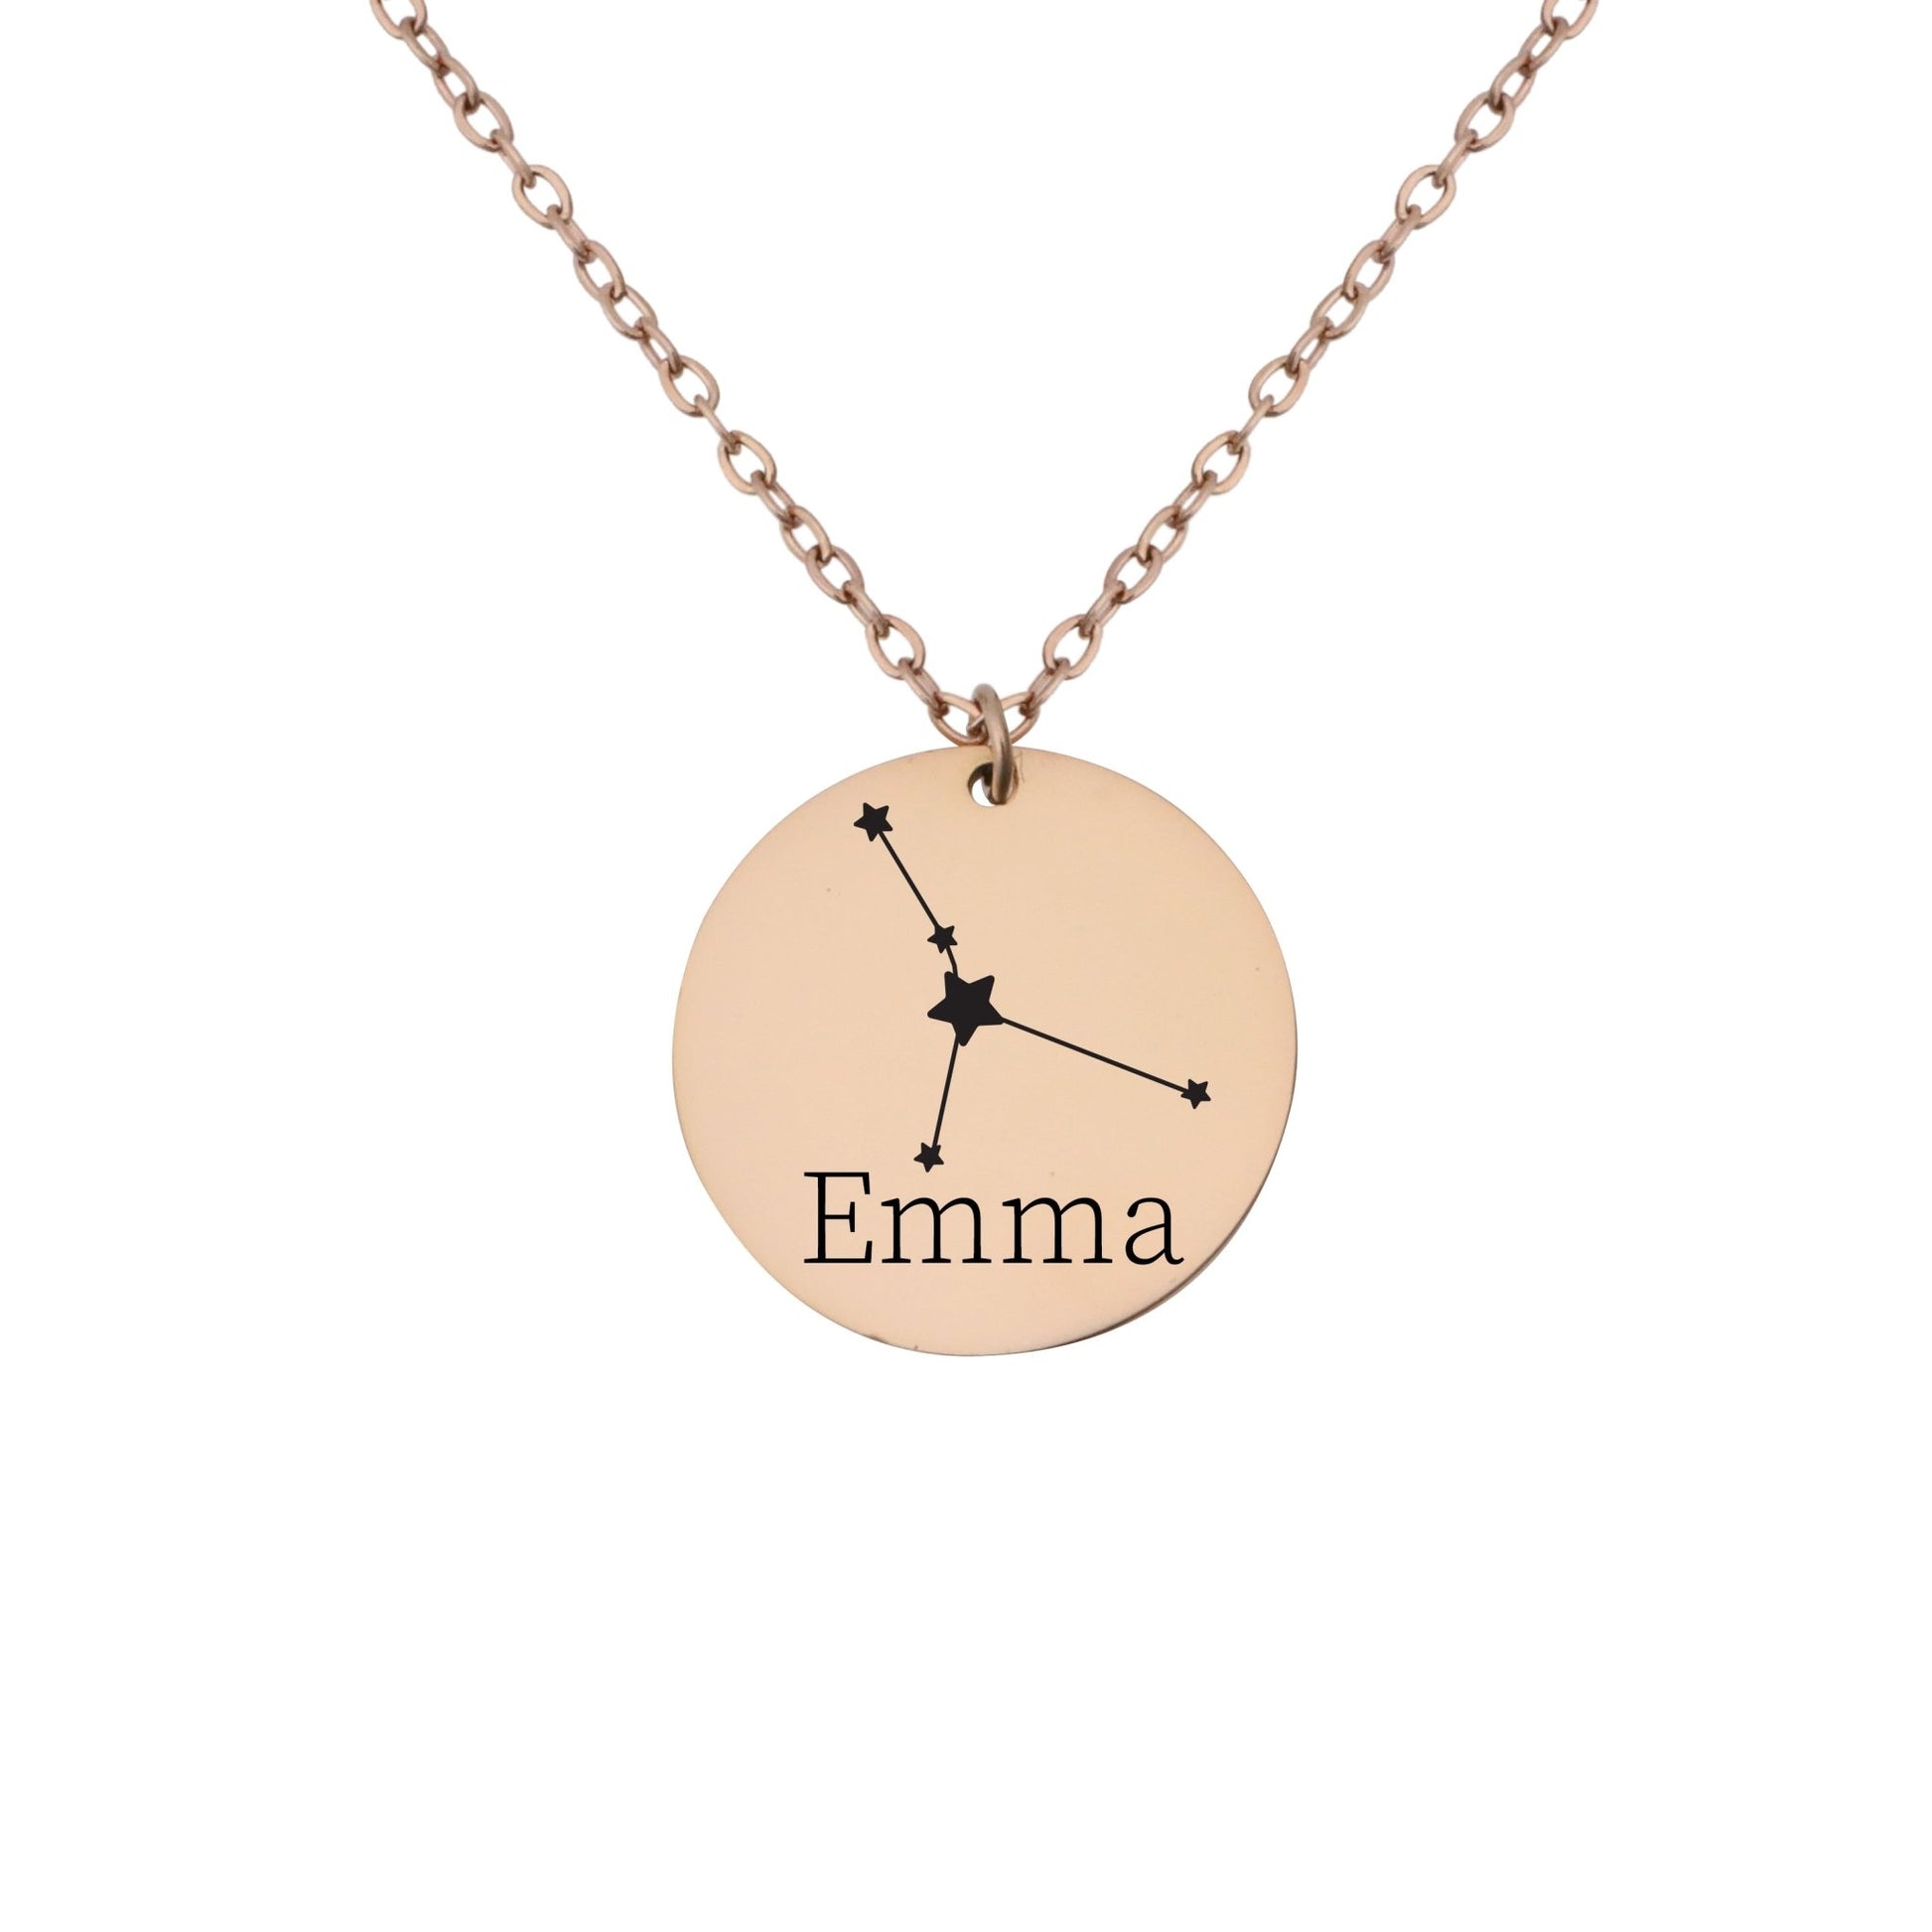 Constellation Necklace Gift Personalized Zodiac Sign Necklace Handmade Jewelry Gift for Birthday Necklace - Custom Jewelry